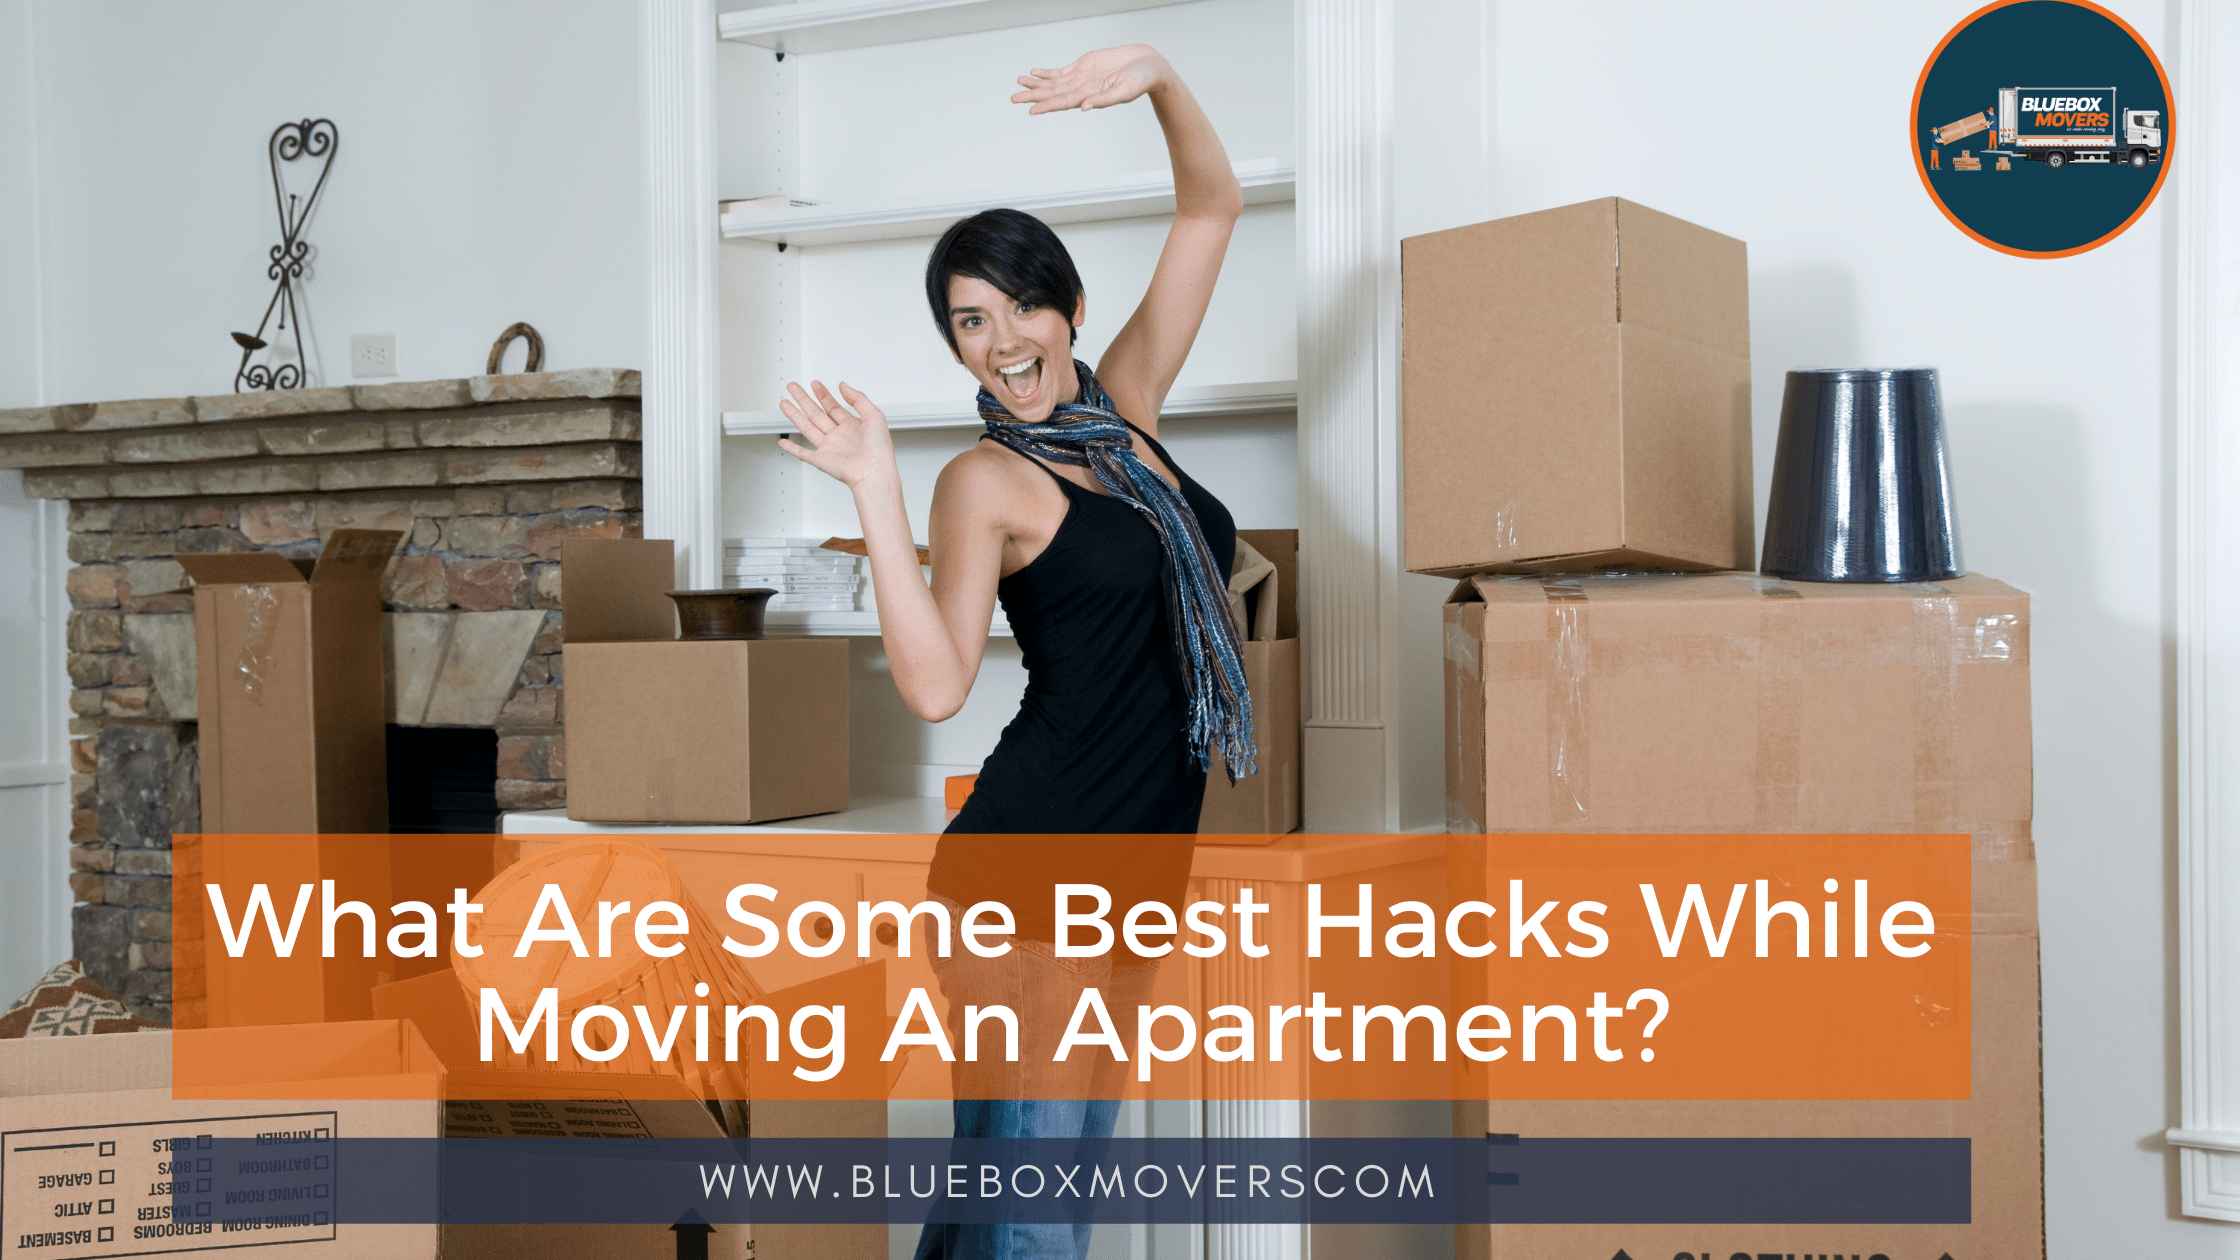 Hacks for Apartment moving